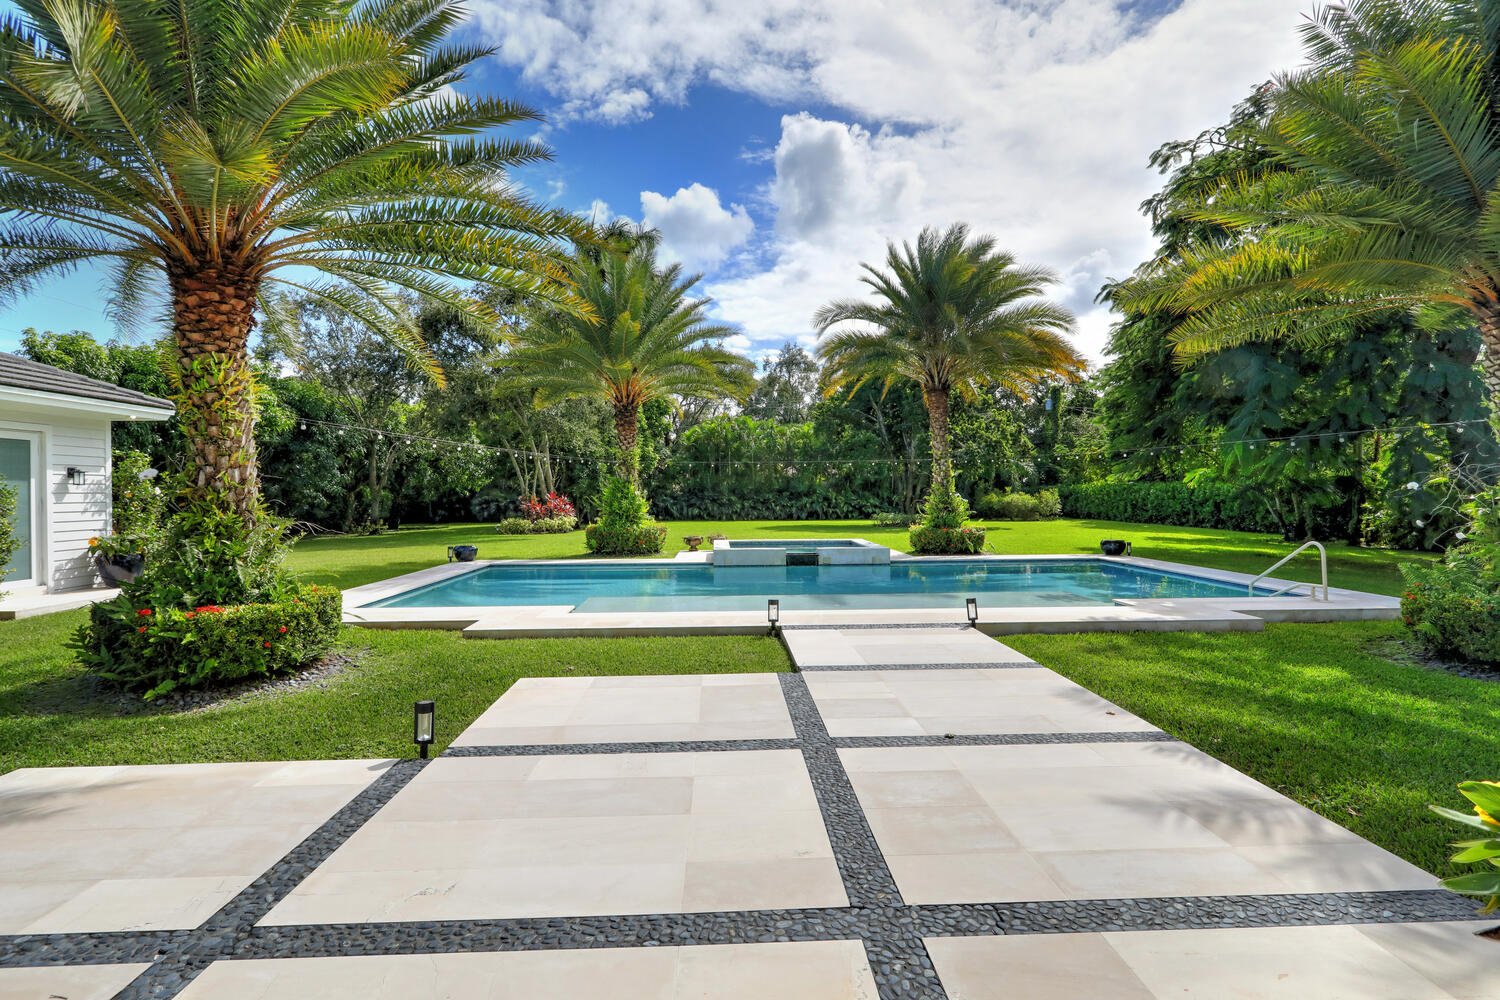 Master Brokers Forum Listing: Check Out This 'Hamptons Meets Key West' Style North Pinecrest Home Asking $5.8 Million 11.jpg